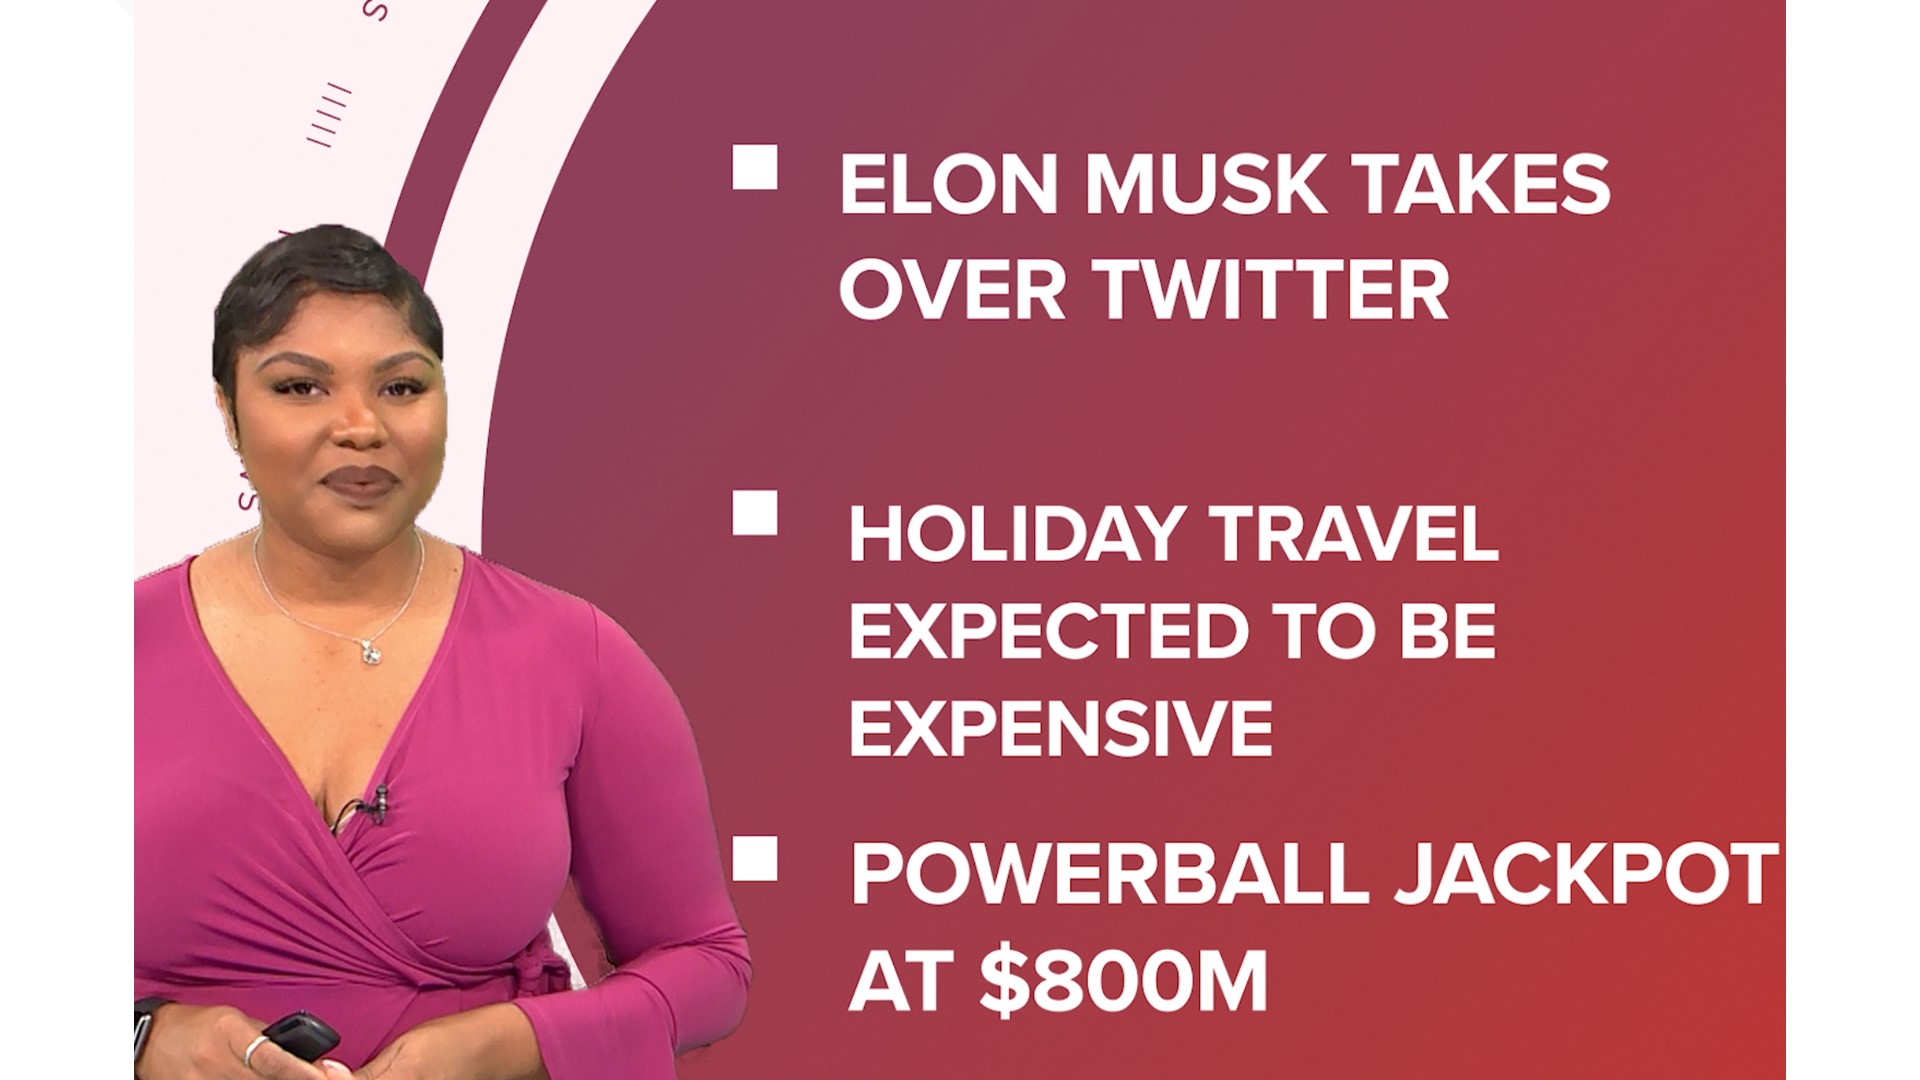 A look at what is happening in the news from Elon Musk officially taking over Twitter to the Powerball jackpot reaching $800M for Saturday night's drawing.